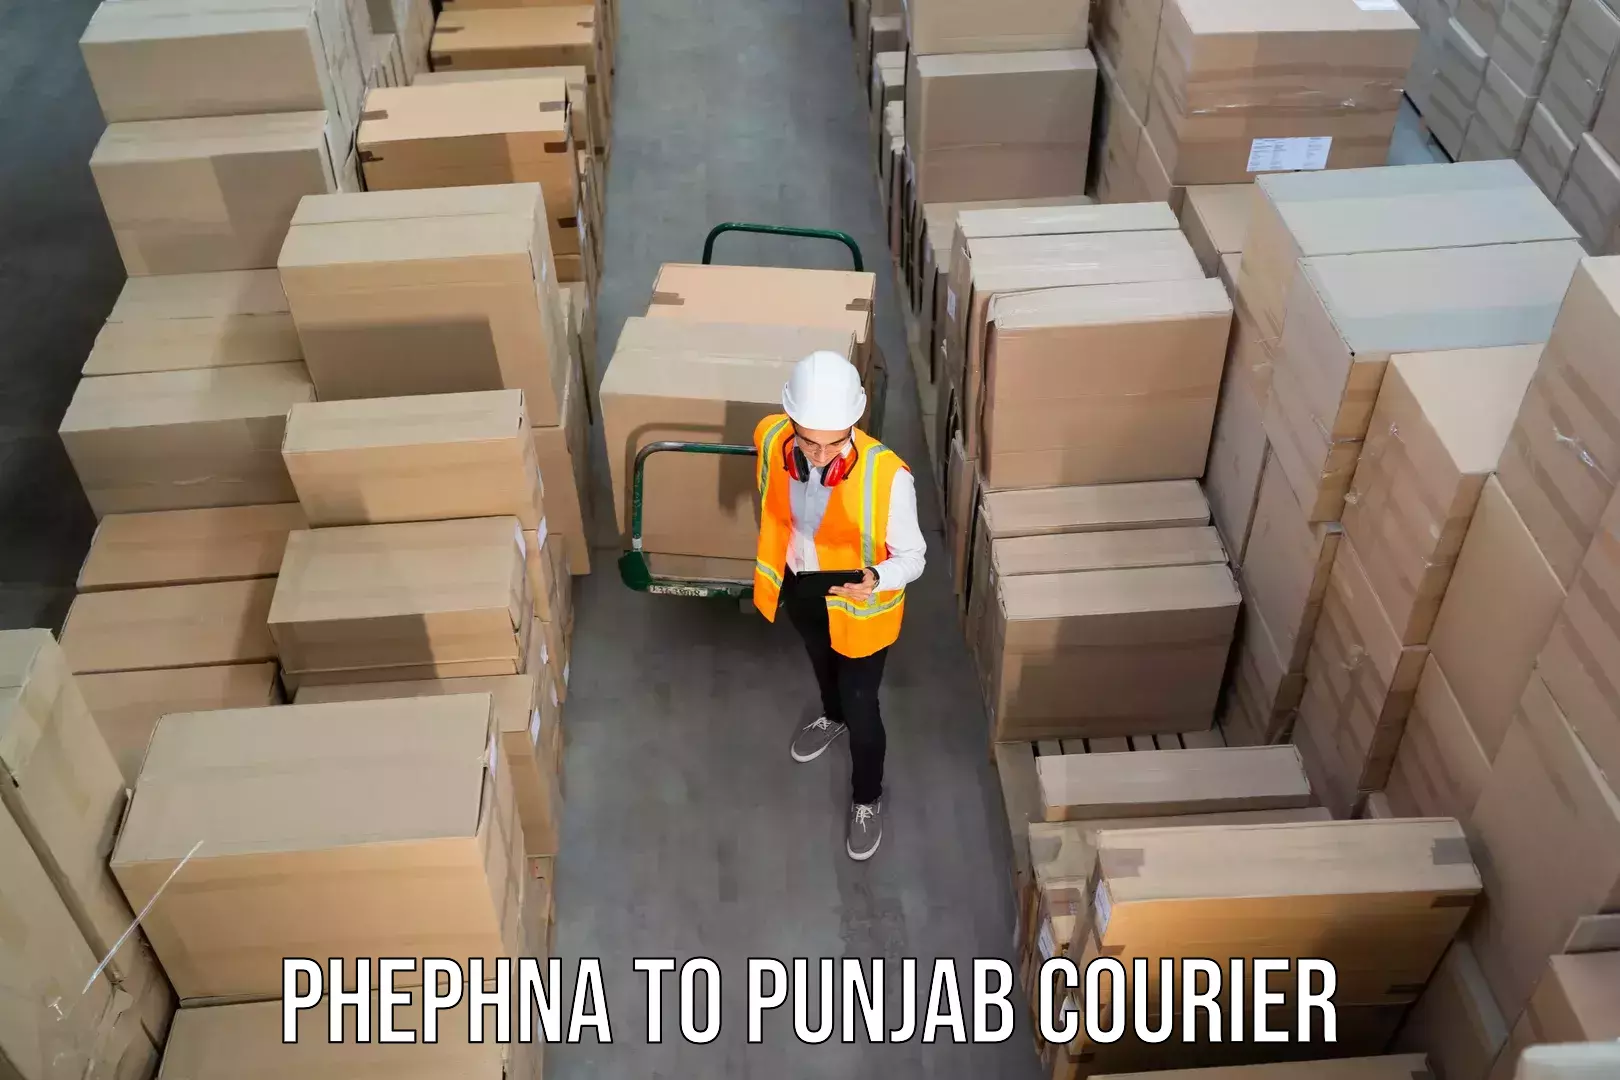 24/7 shipping services Phephna to Punjab